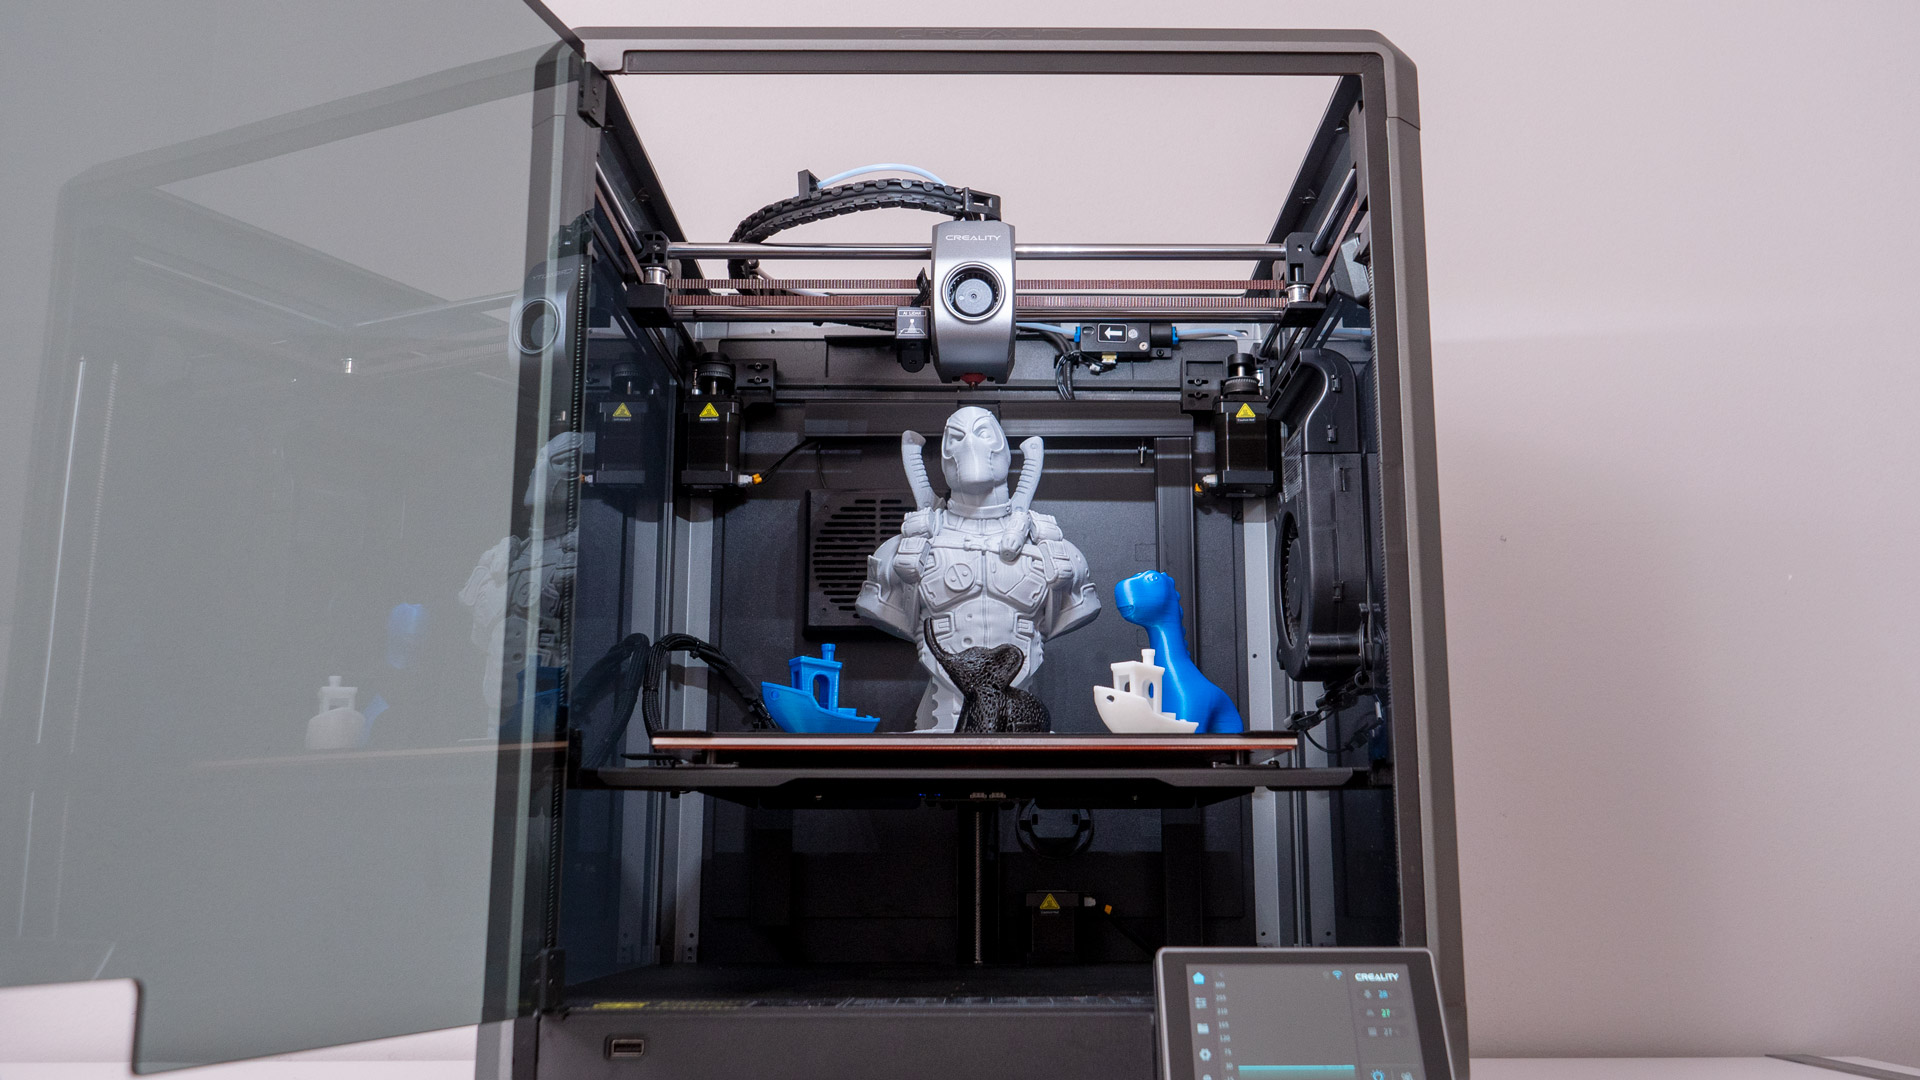 Creality K1 Max Review - The Best 3D Printer